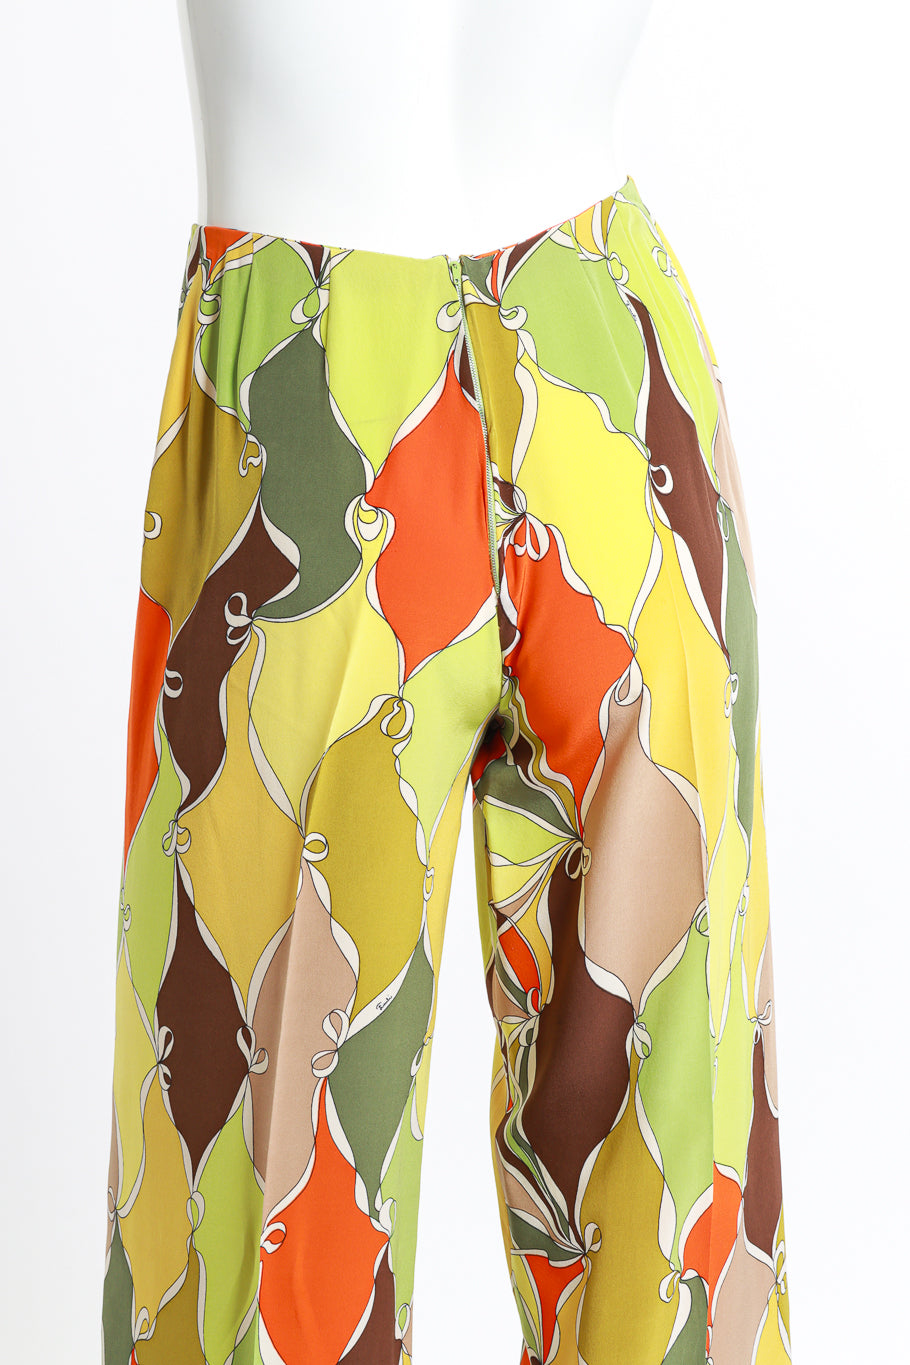 Vintage Emilio Pucci ruffle tunic high waisted trouser set close up view of trousers as seen on mannequin @RECESS LA